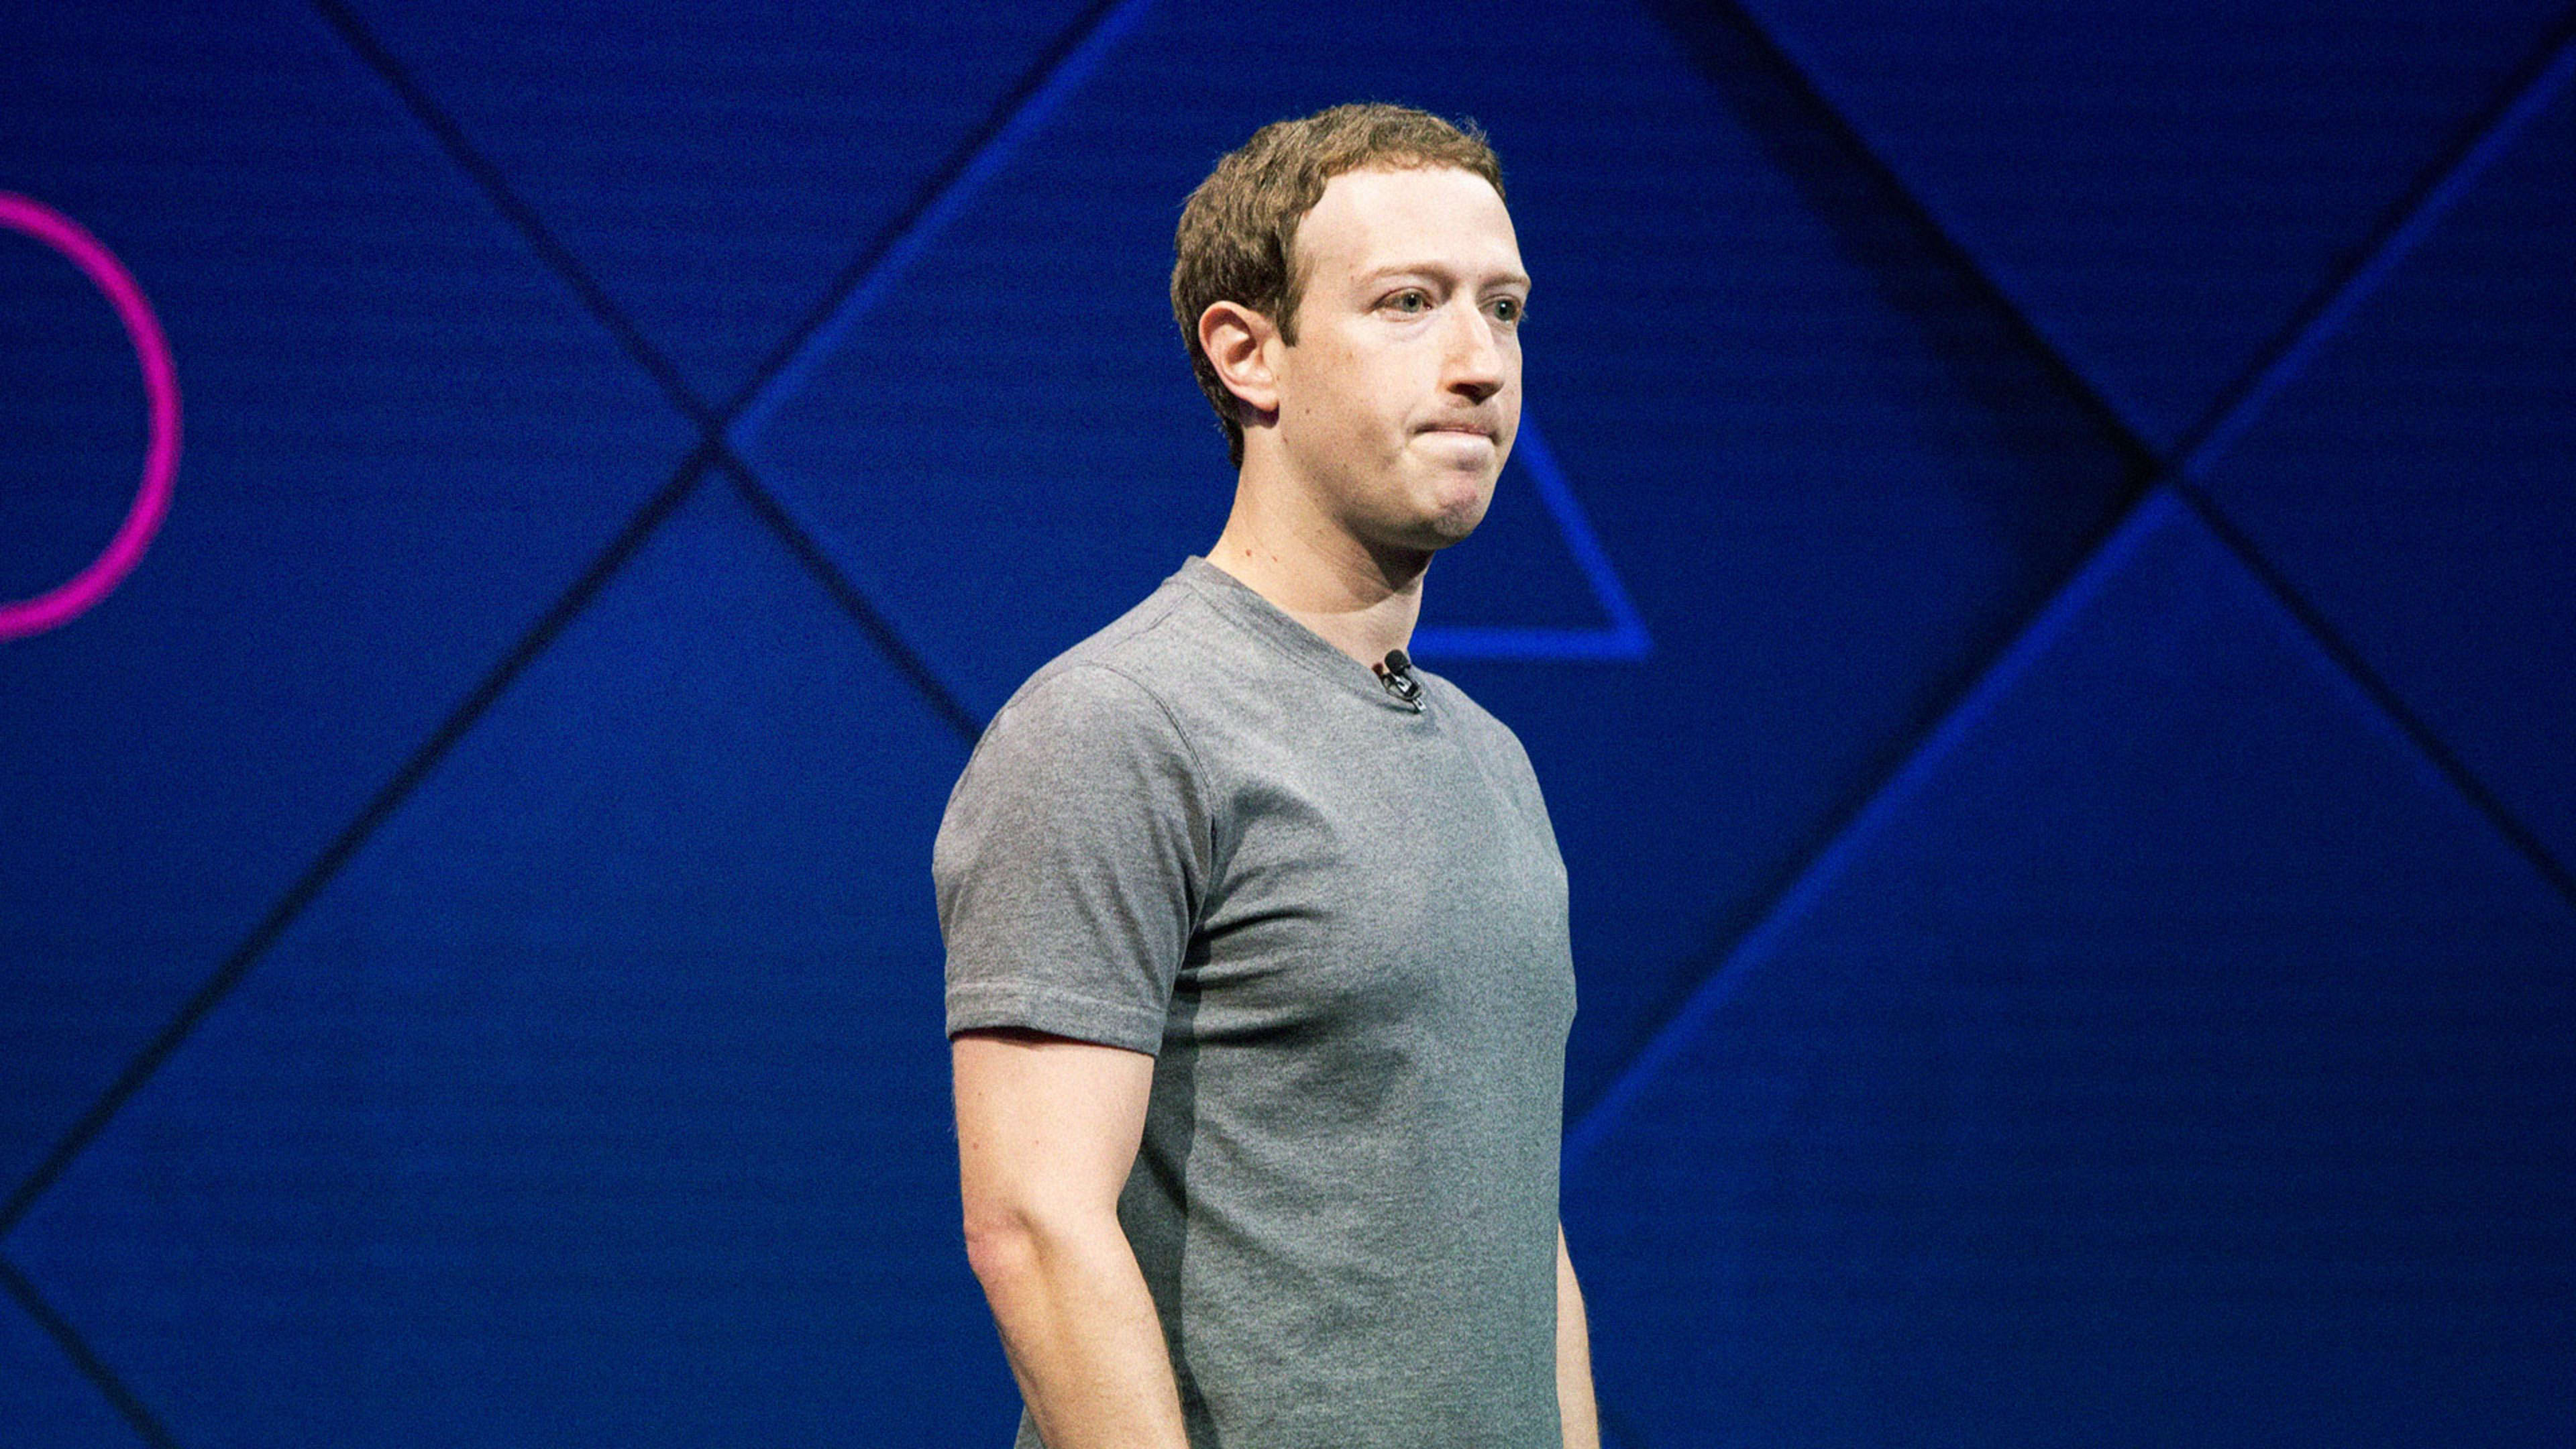 A Brief History Of Mark Zuckerberg Apologizing (Or Not Apologizing) For Stuff